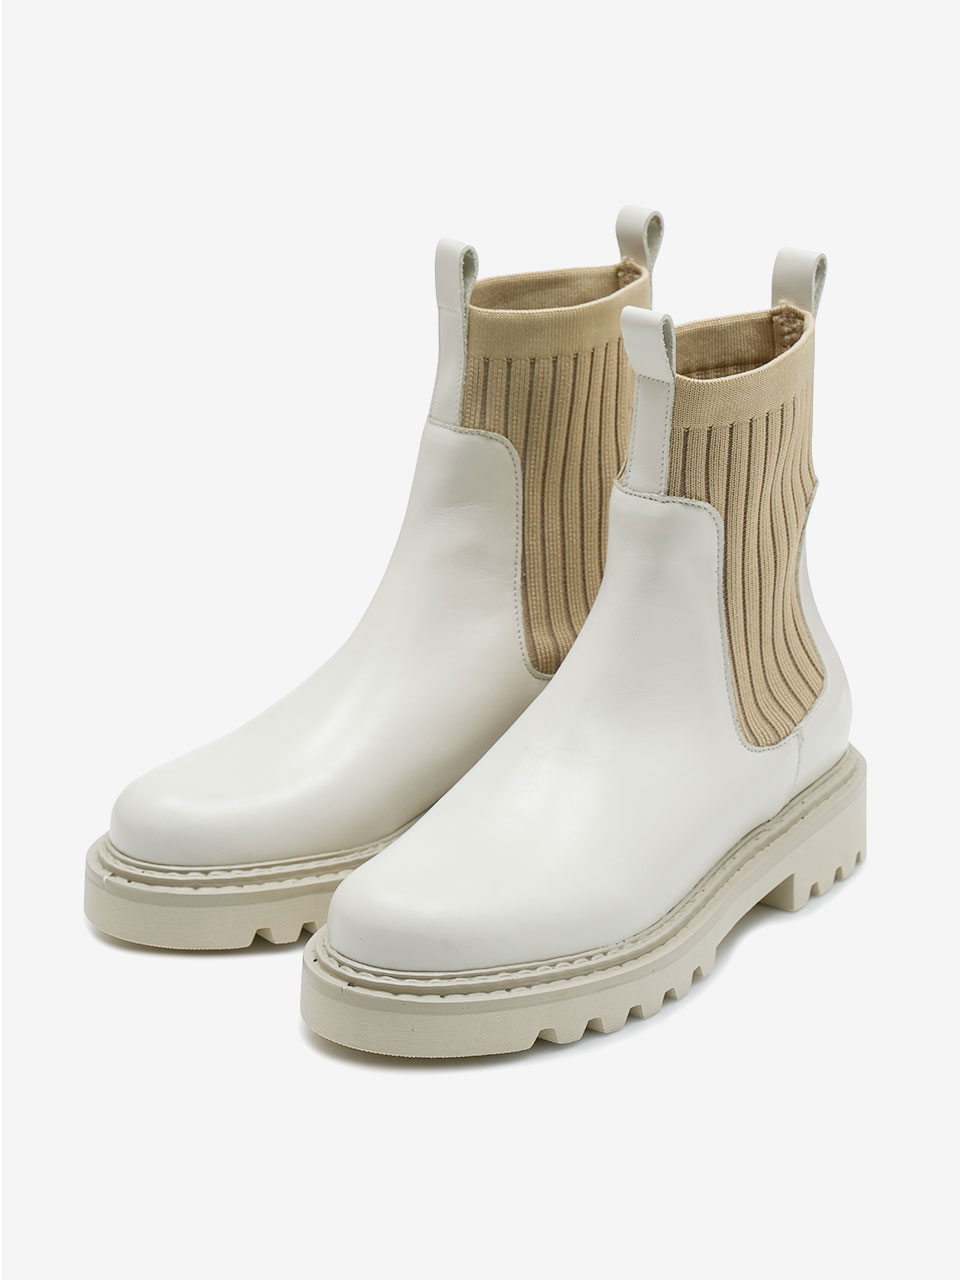 CHELSEA BOOTS - OFF WHITE